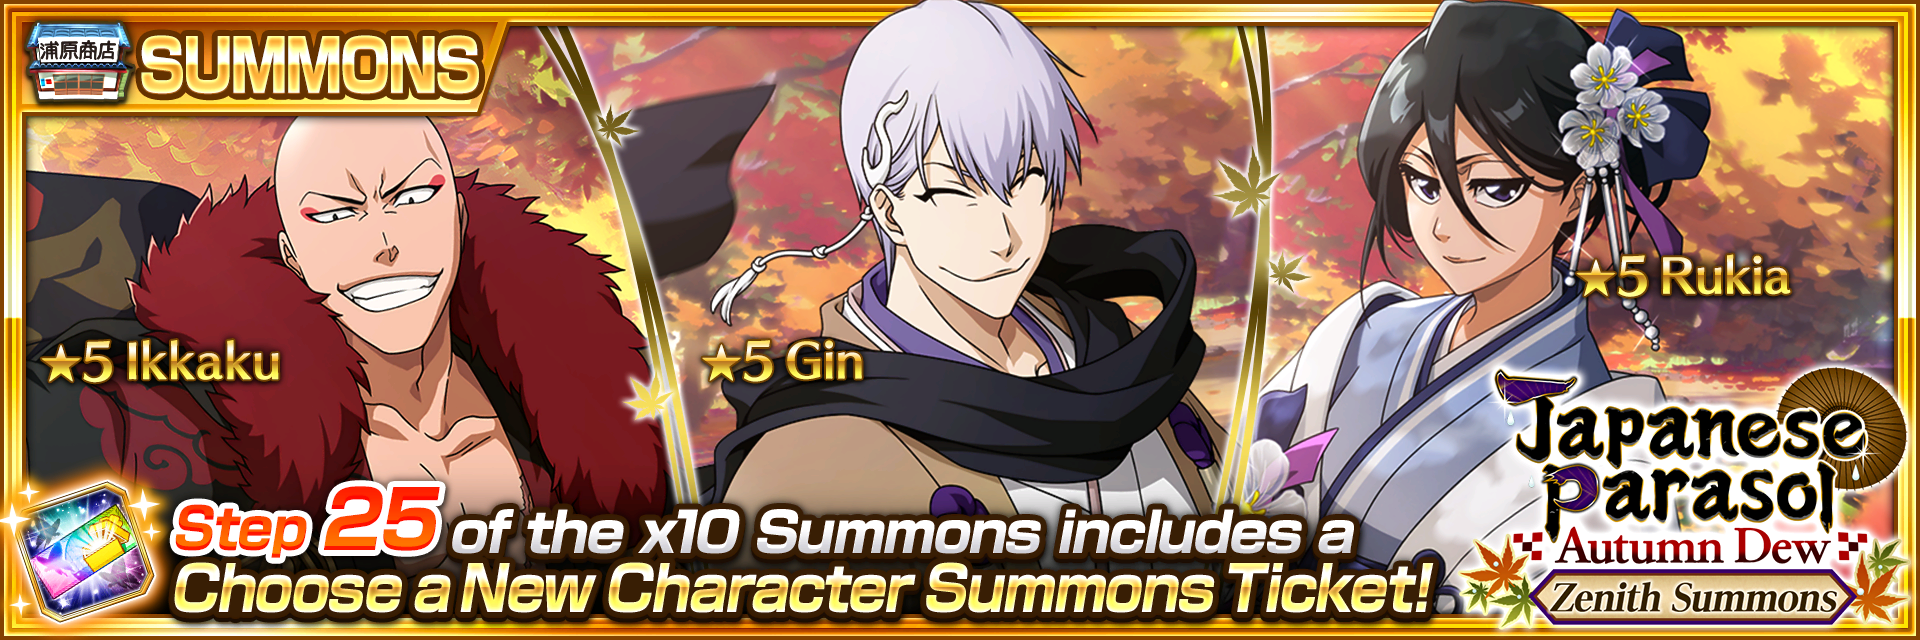 Guide :: Bleach Brave Souls - Info and  - Steam Community